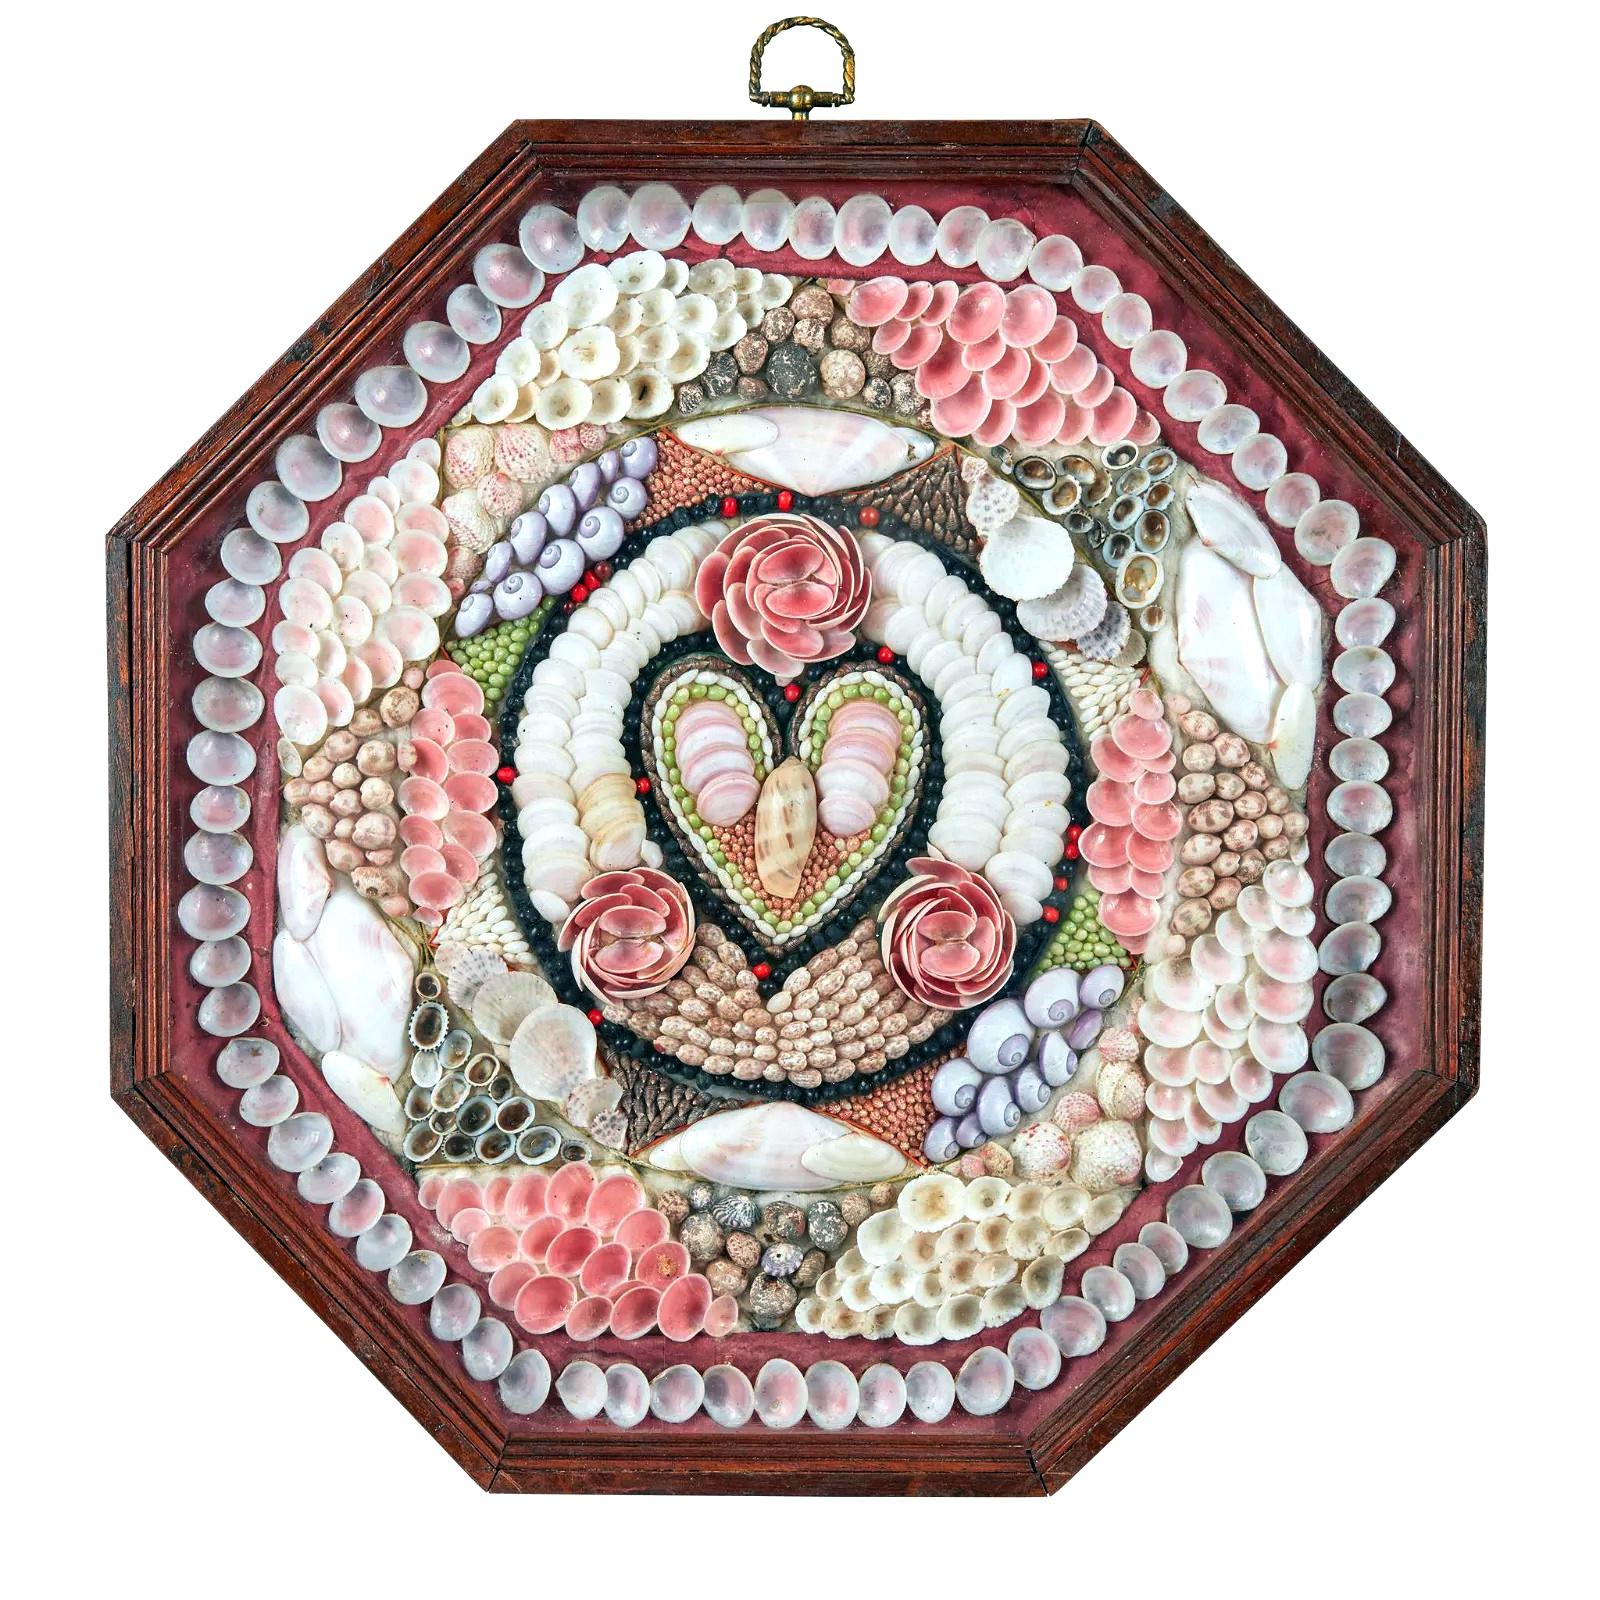 West Indian Sailor's Valentine,
Circa 1880

The large single sailor's valentine is composed from a variety of shells in concentric and geometric patterns, centred with a heart motif, surrounded by three flowers; within an octagonal stained wood